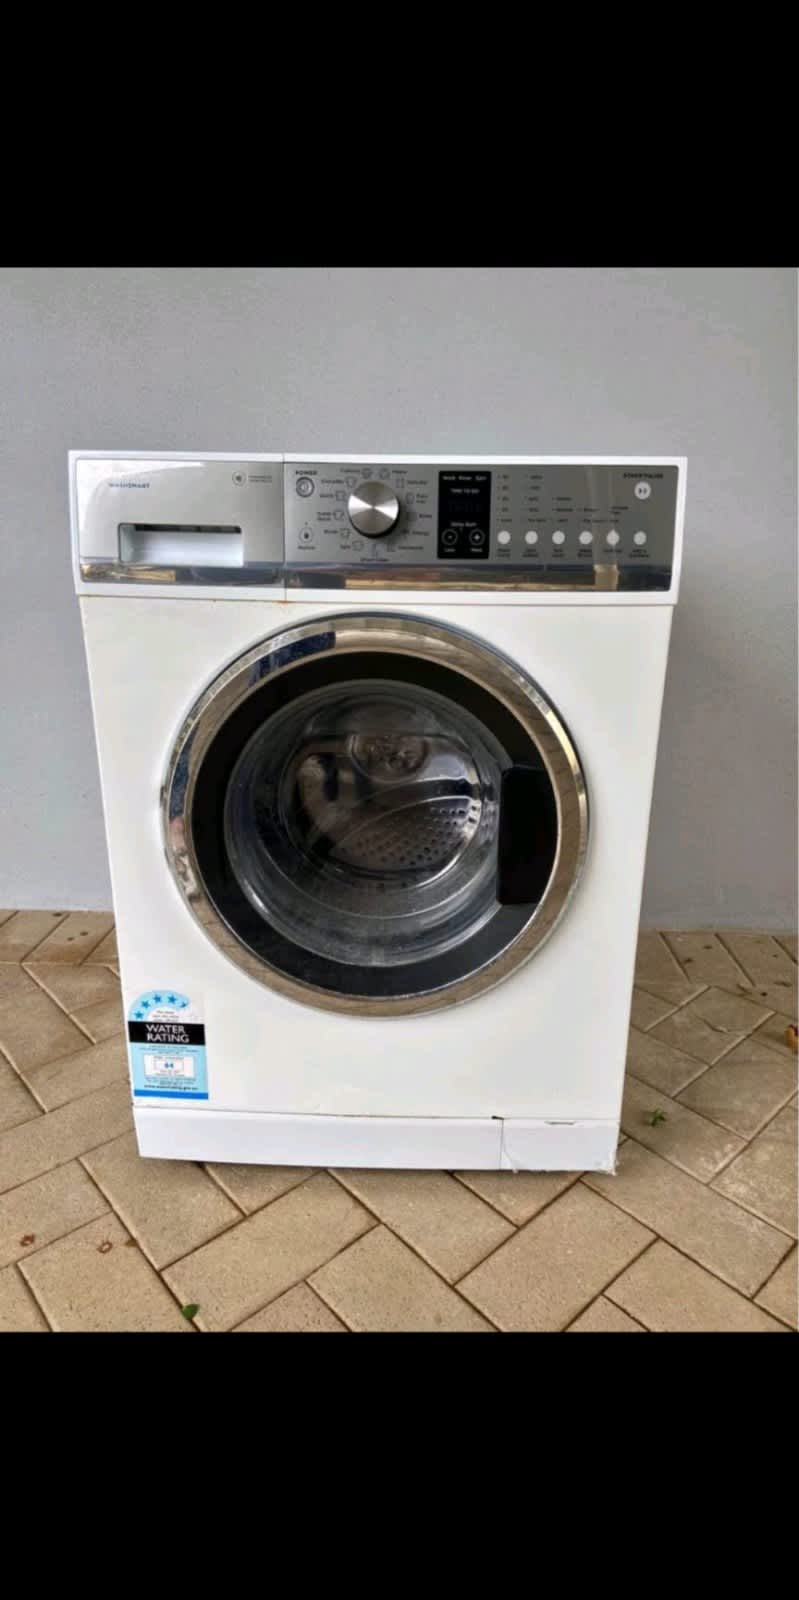 Portable Washers for sale in Kambah, Facebook Marketplace